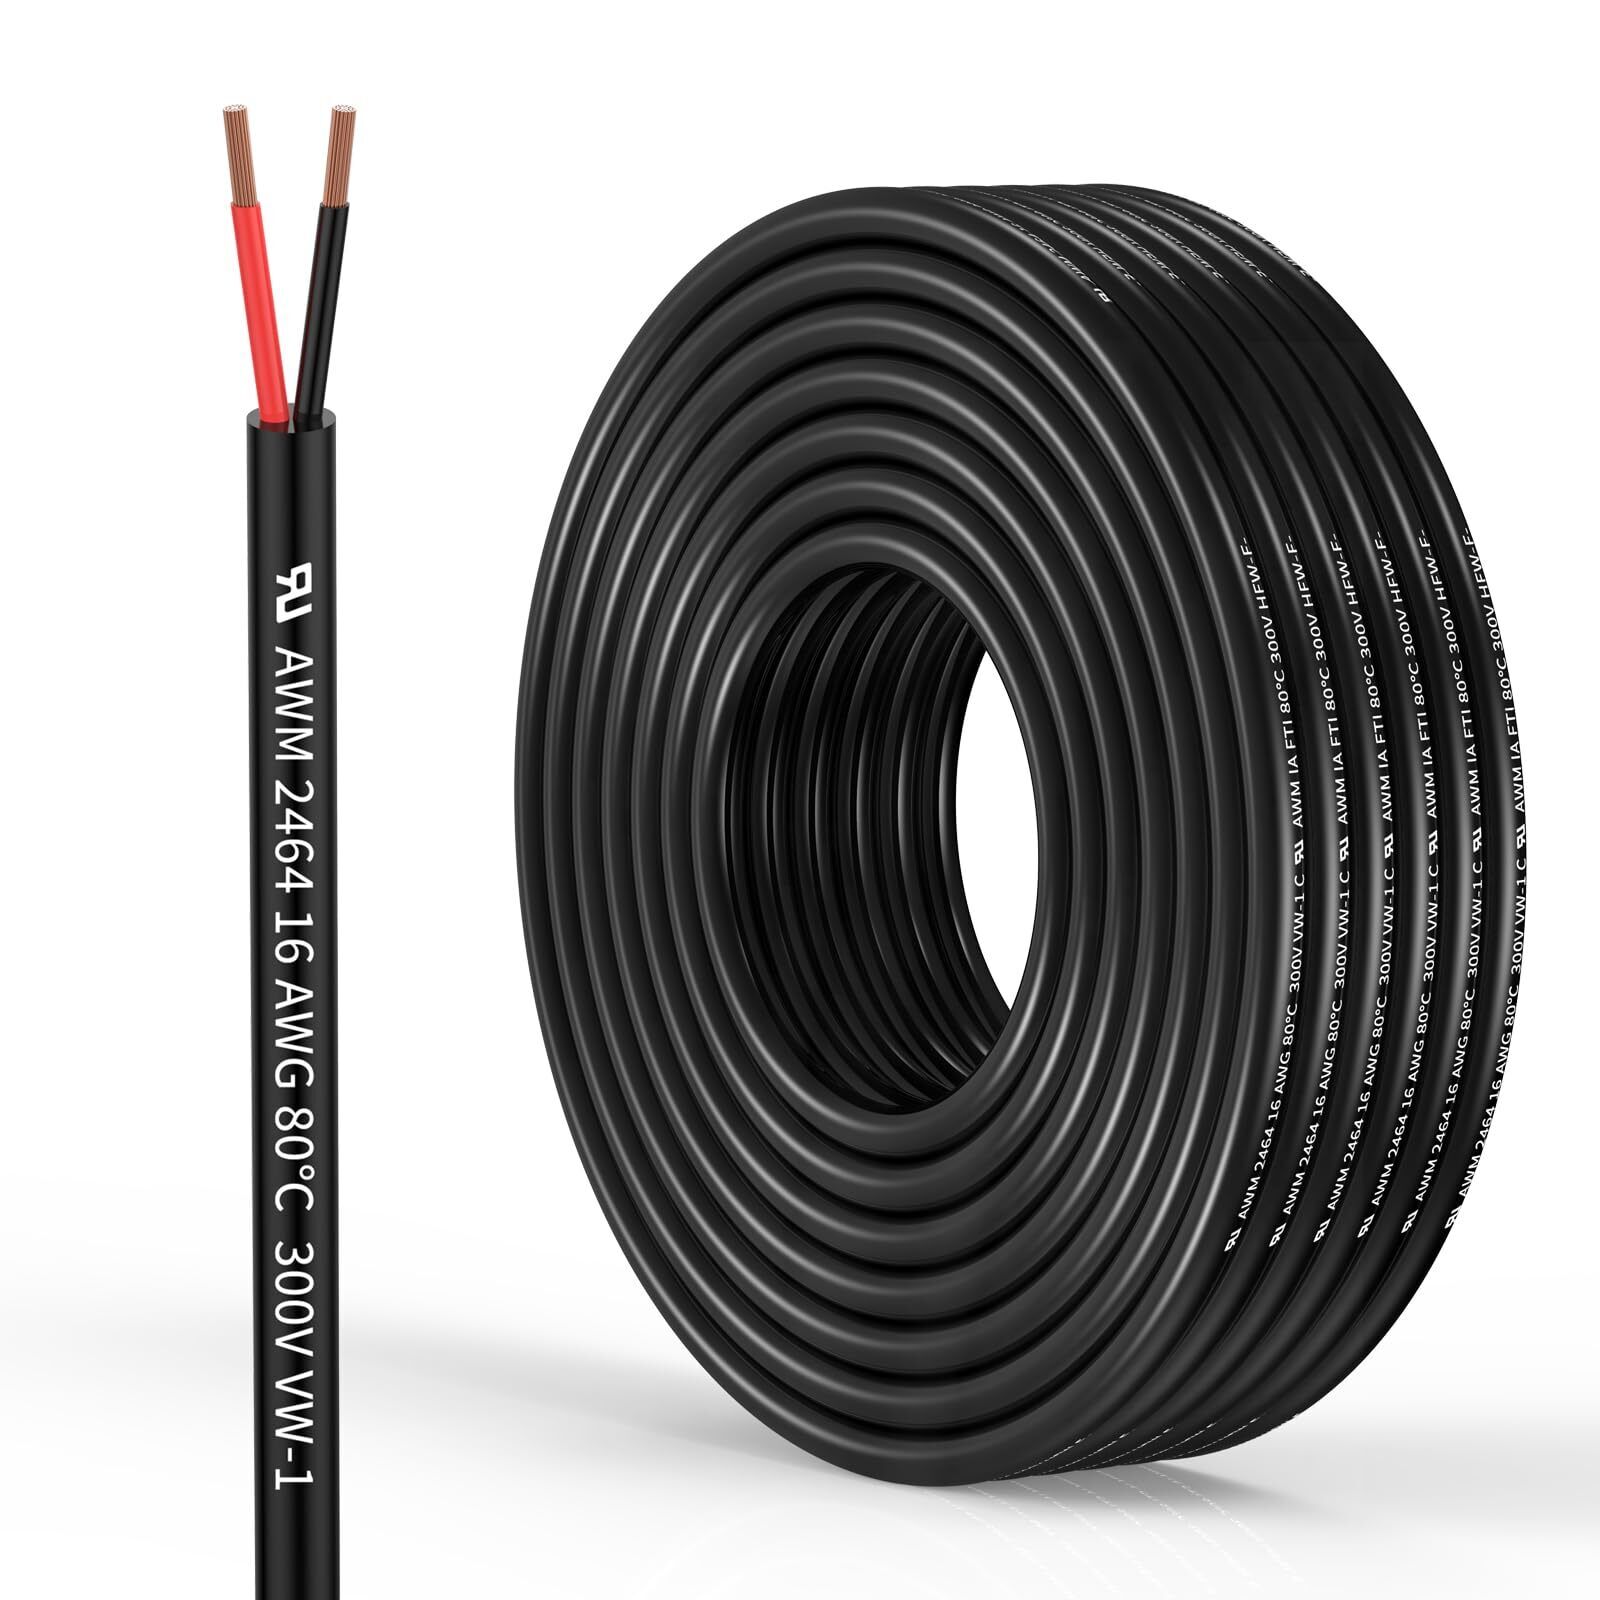 16 Gauge 2 Conductor Electrical Wire 16AWG Electrical Wire Stranded PVC Cord ...